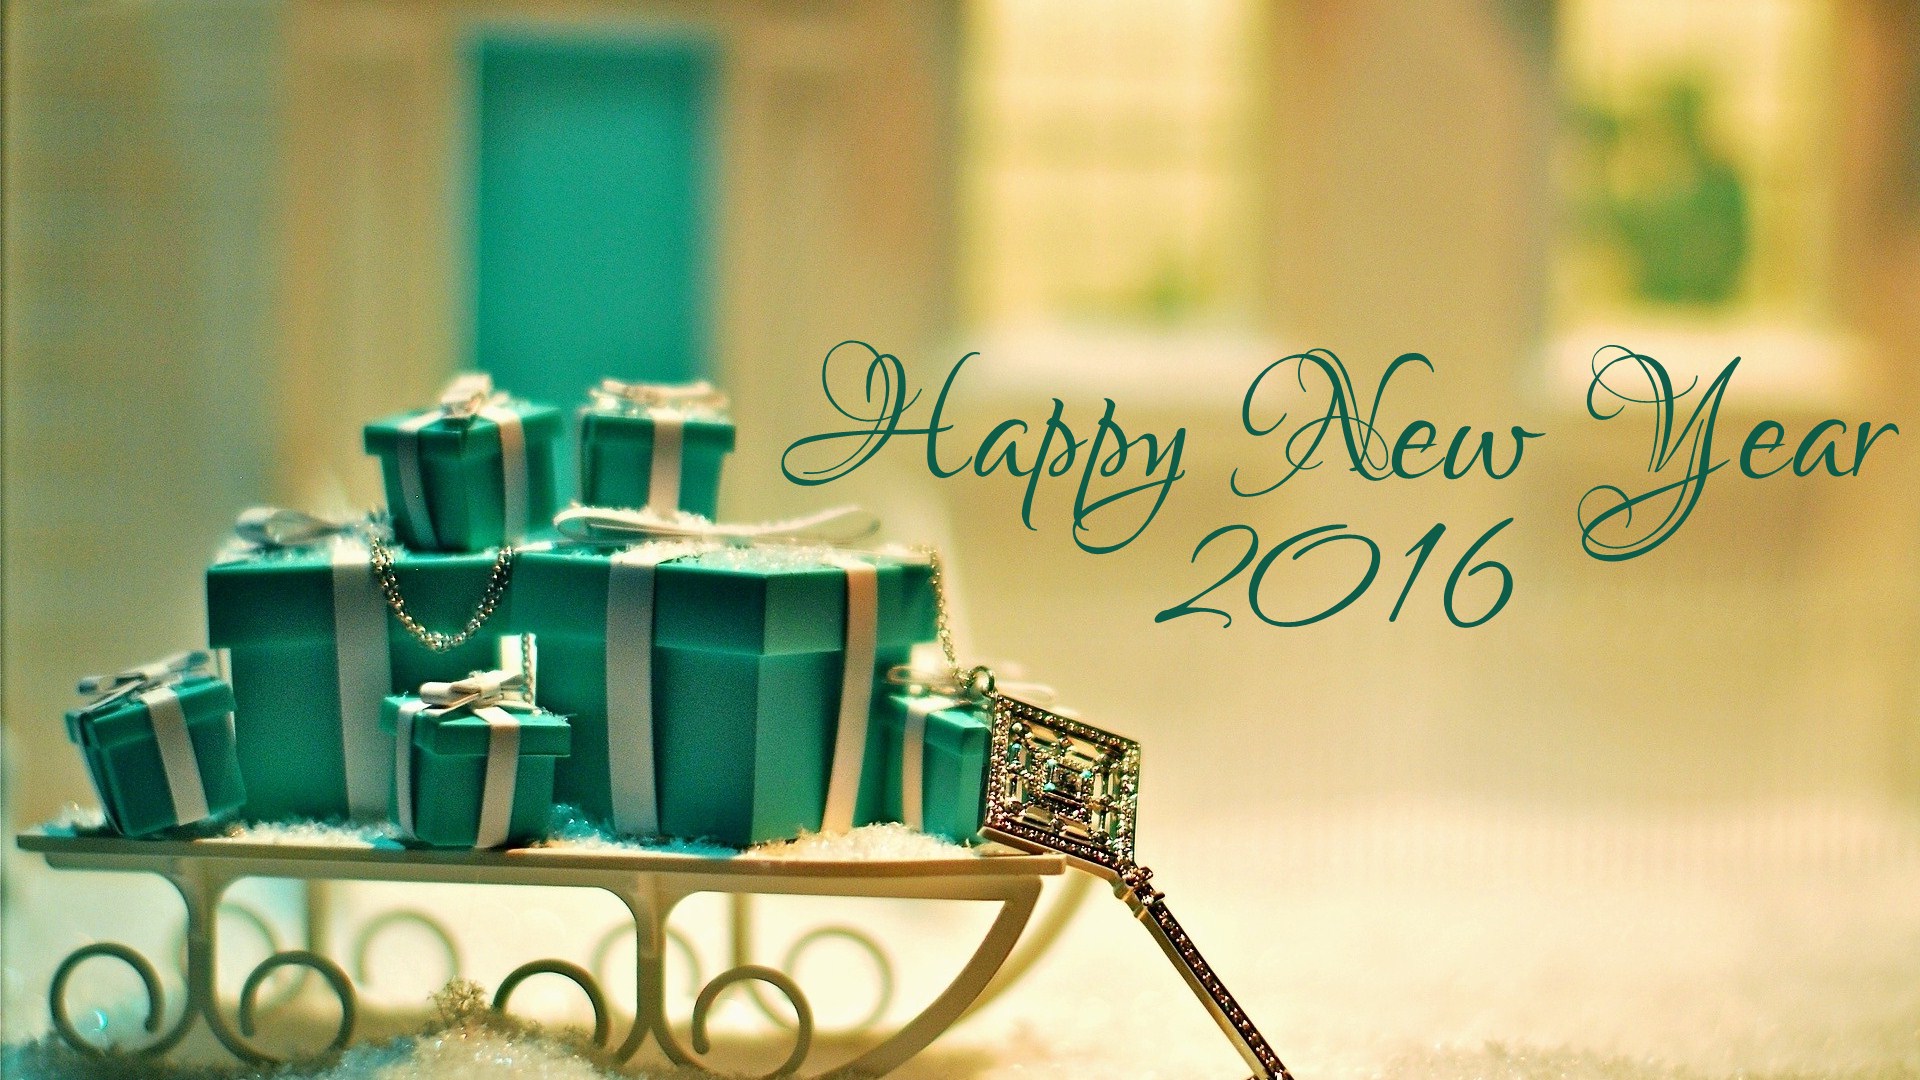 Cool Wallpapers holiday, new year 2016, new year